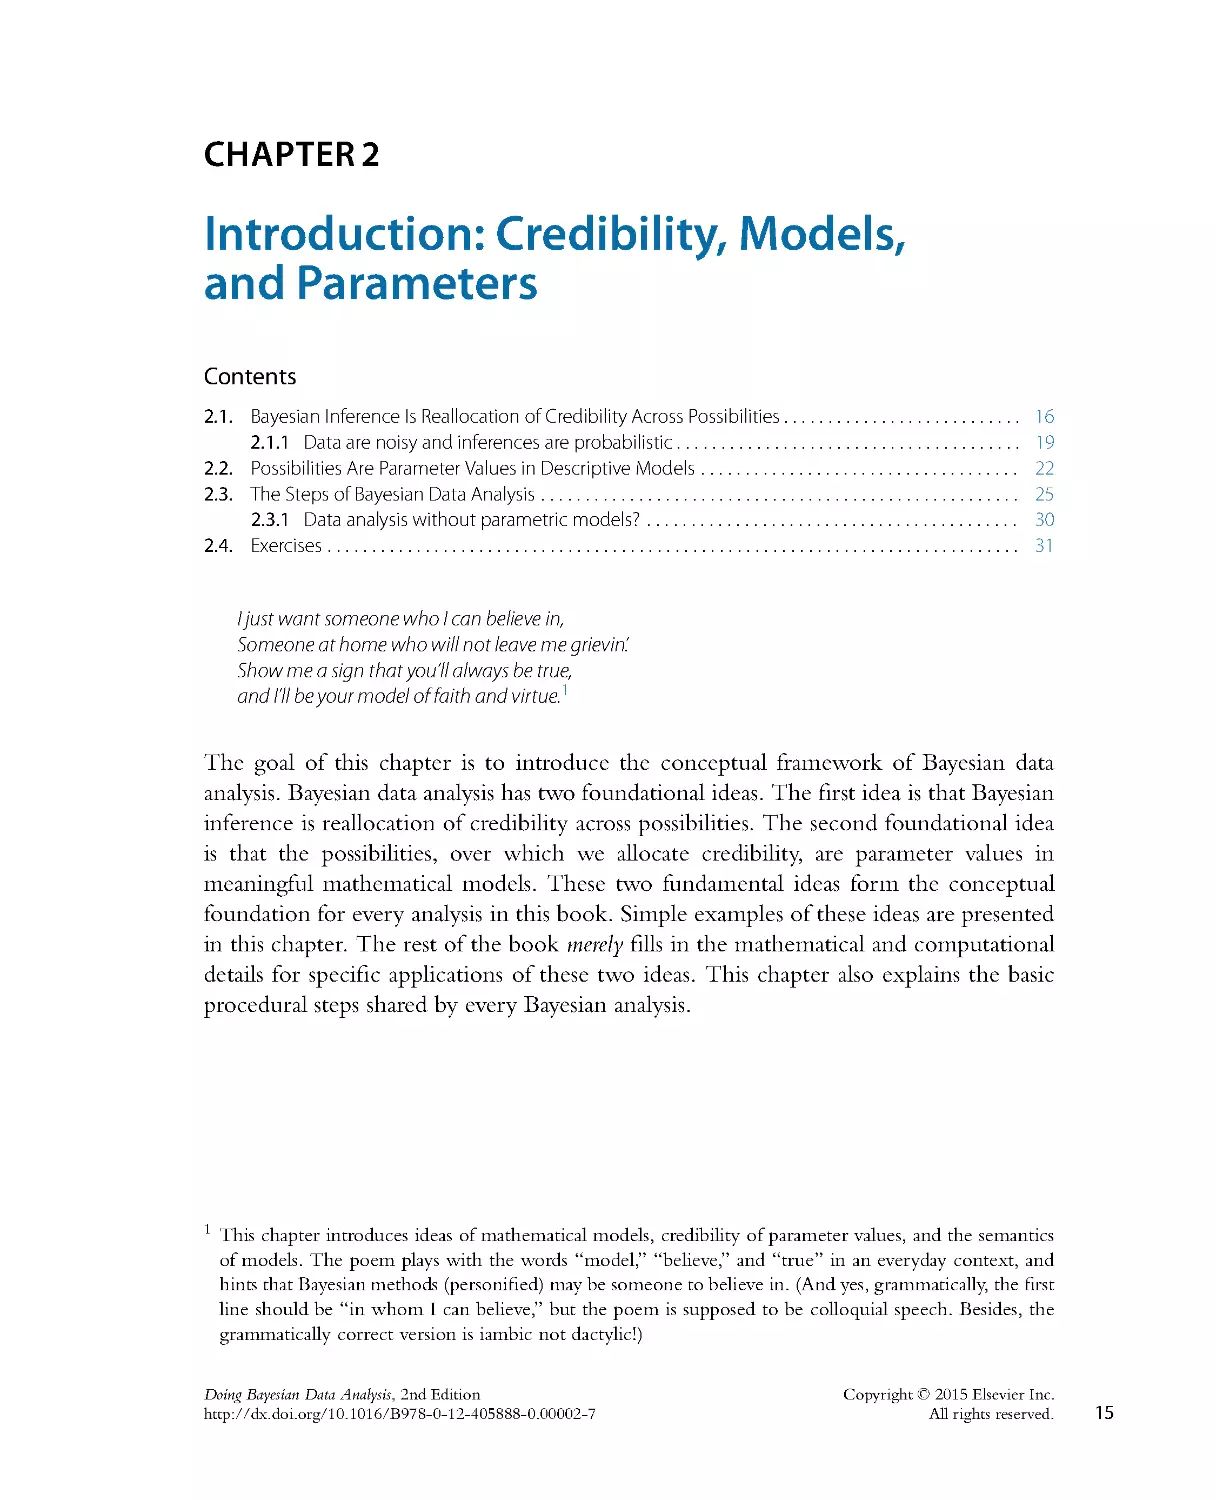 6. Chapter-2-Introduction-Credibility-Models-and-Parameters_2015_Doing-Bayesian-Data-Analysis-Second-Edition-